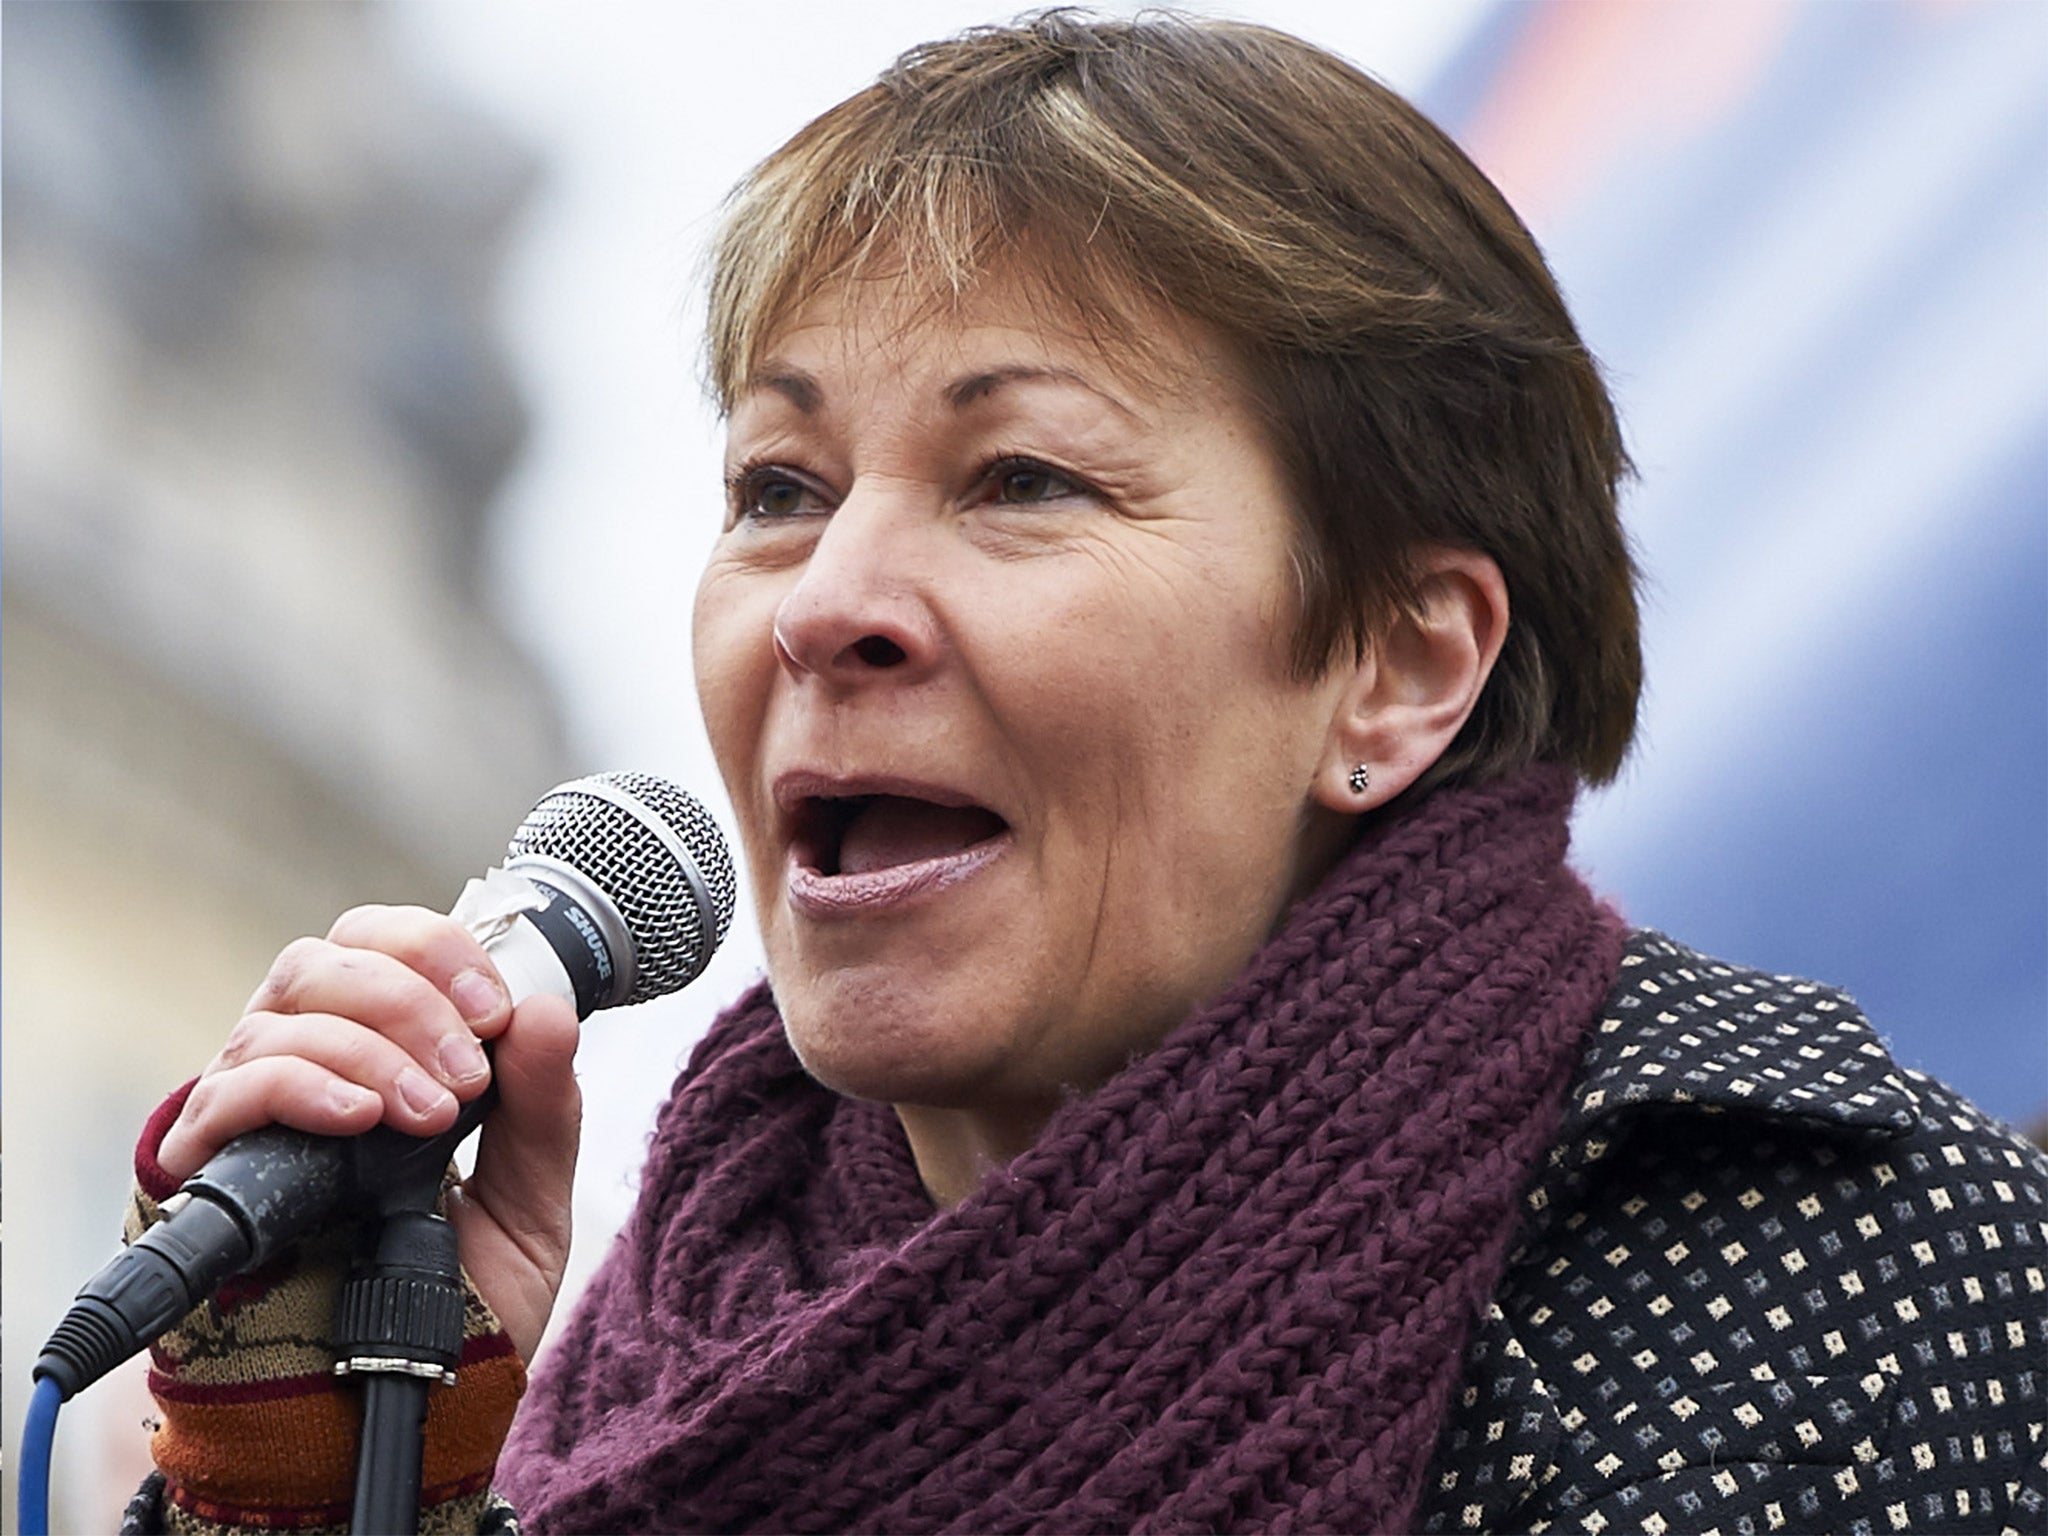 Green MP Caroline Lucas warned replacing the weapons system wasn't sensible